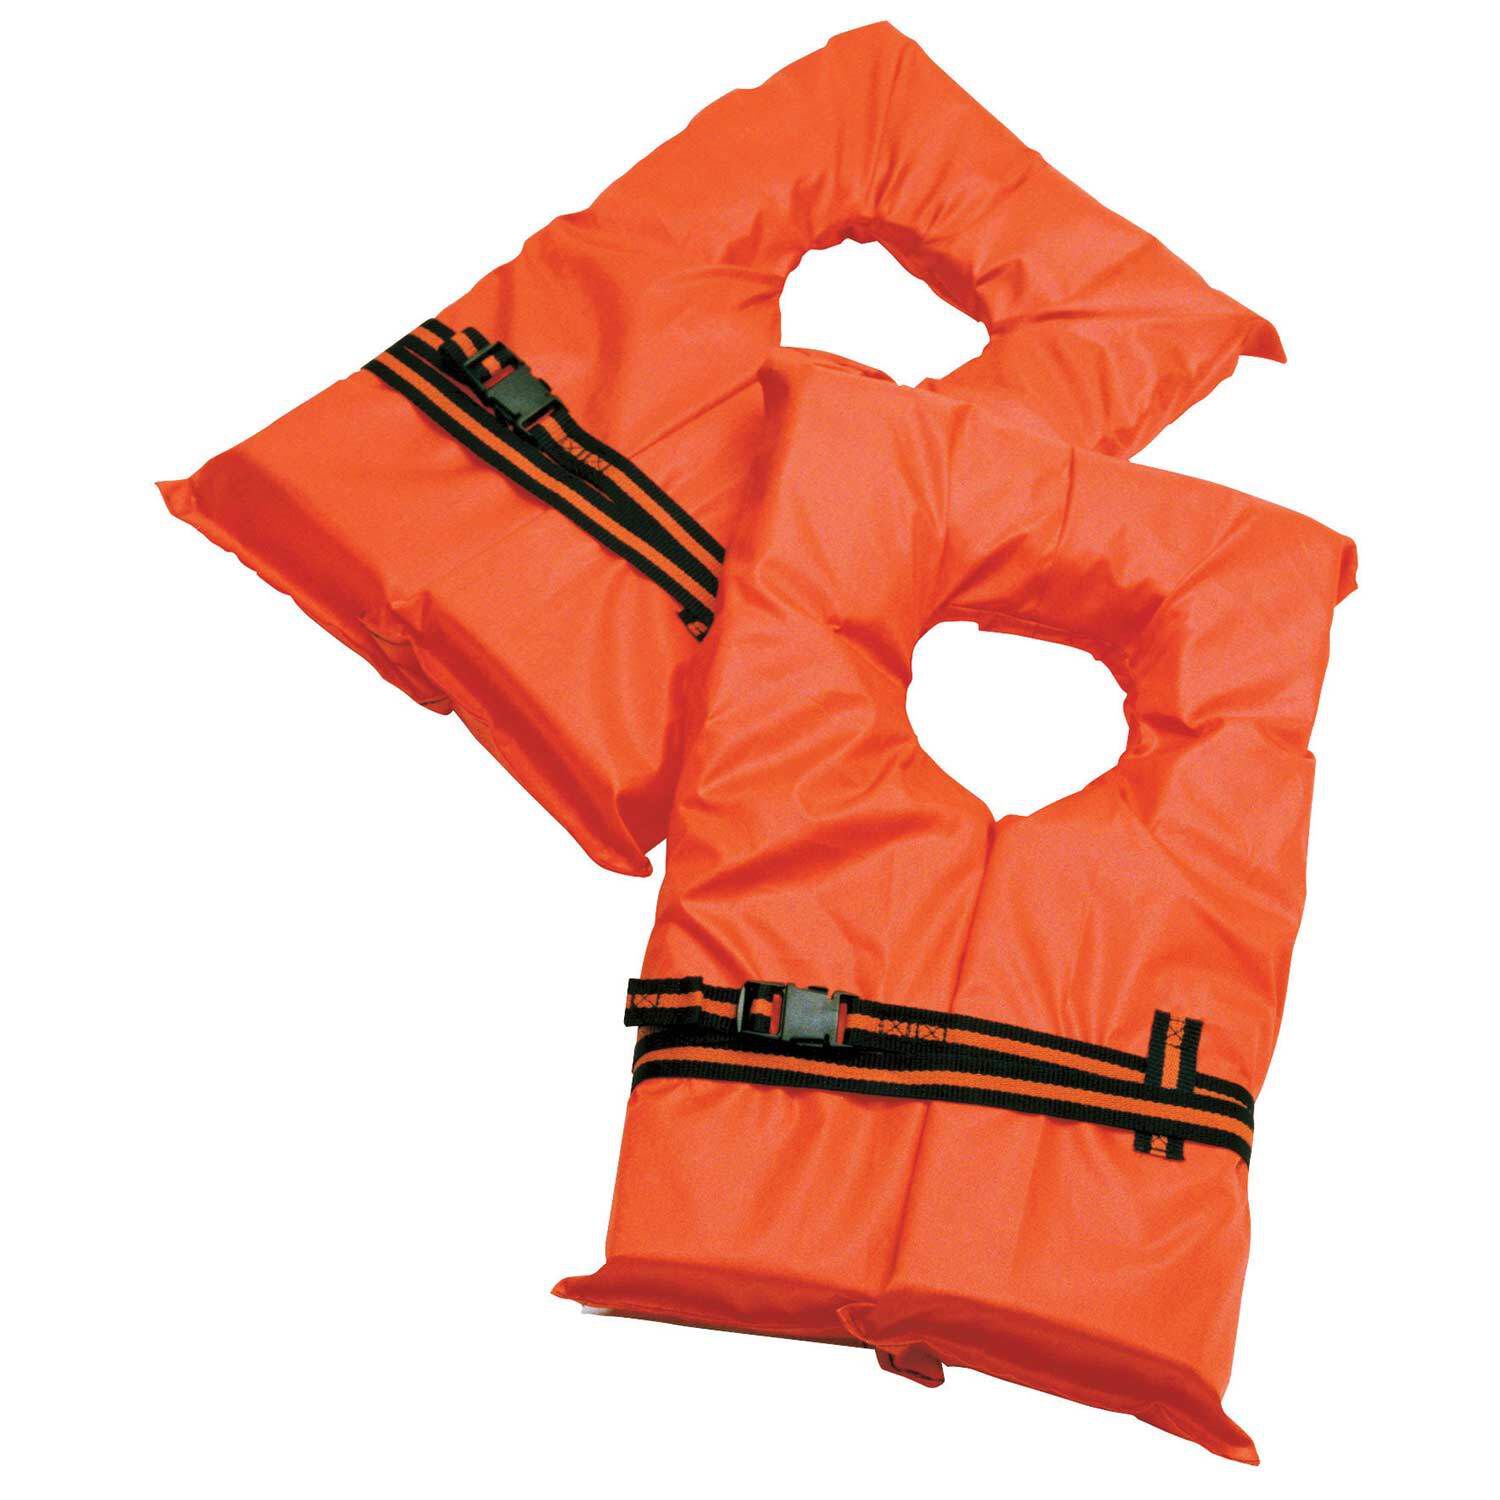 Brand New 2 color Infant 0-30 lbs Stearns Near-Shore Buoyant Vest Type II PFD 